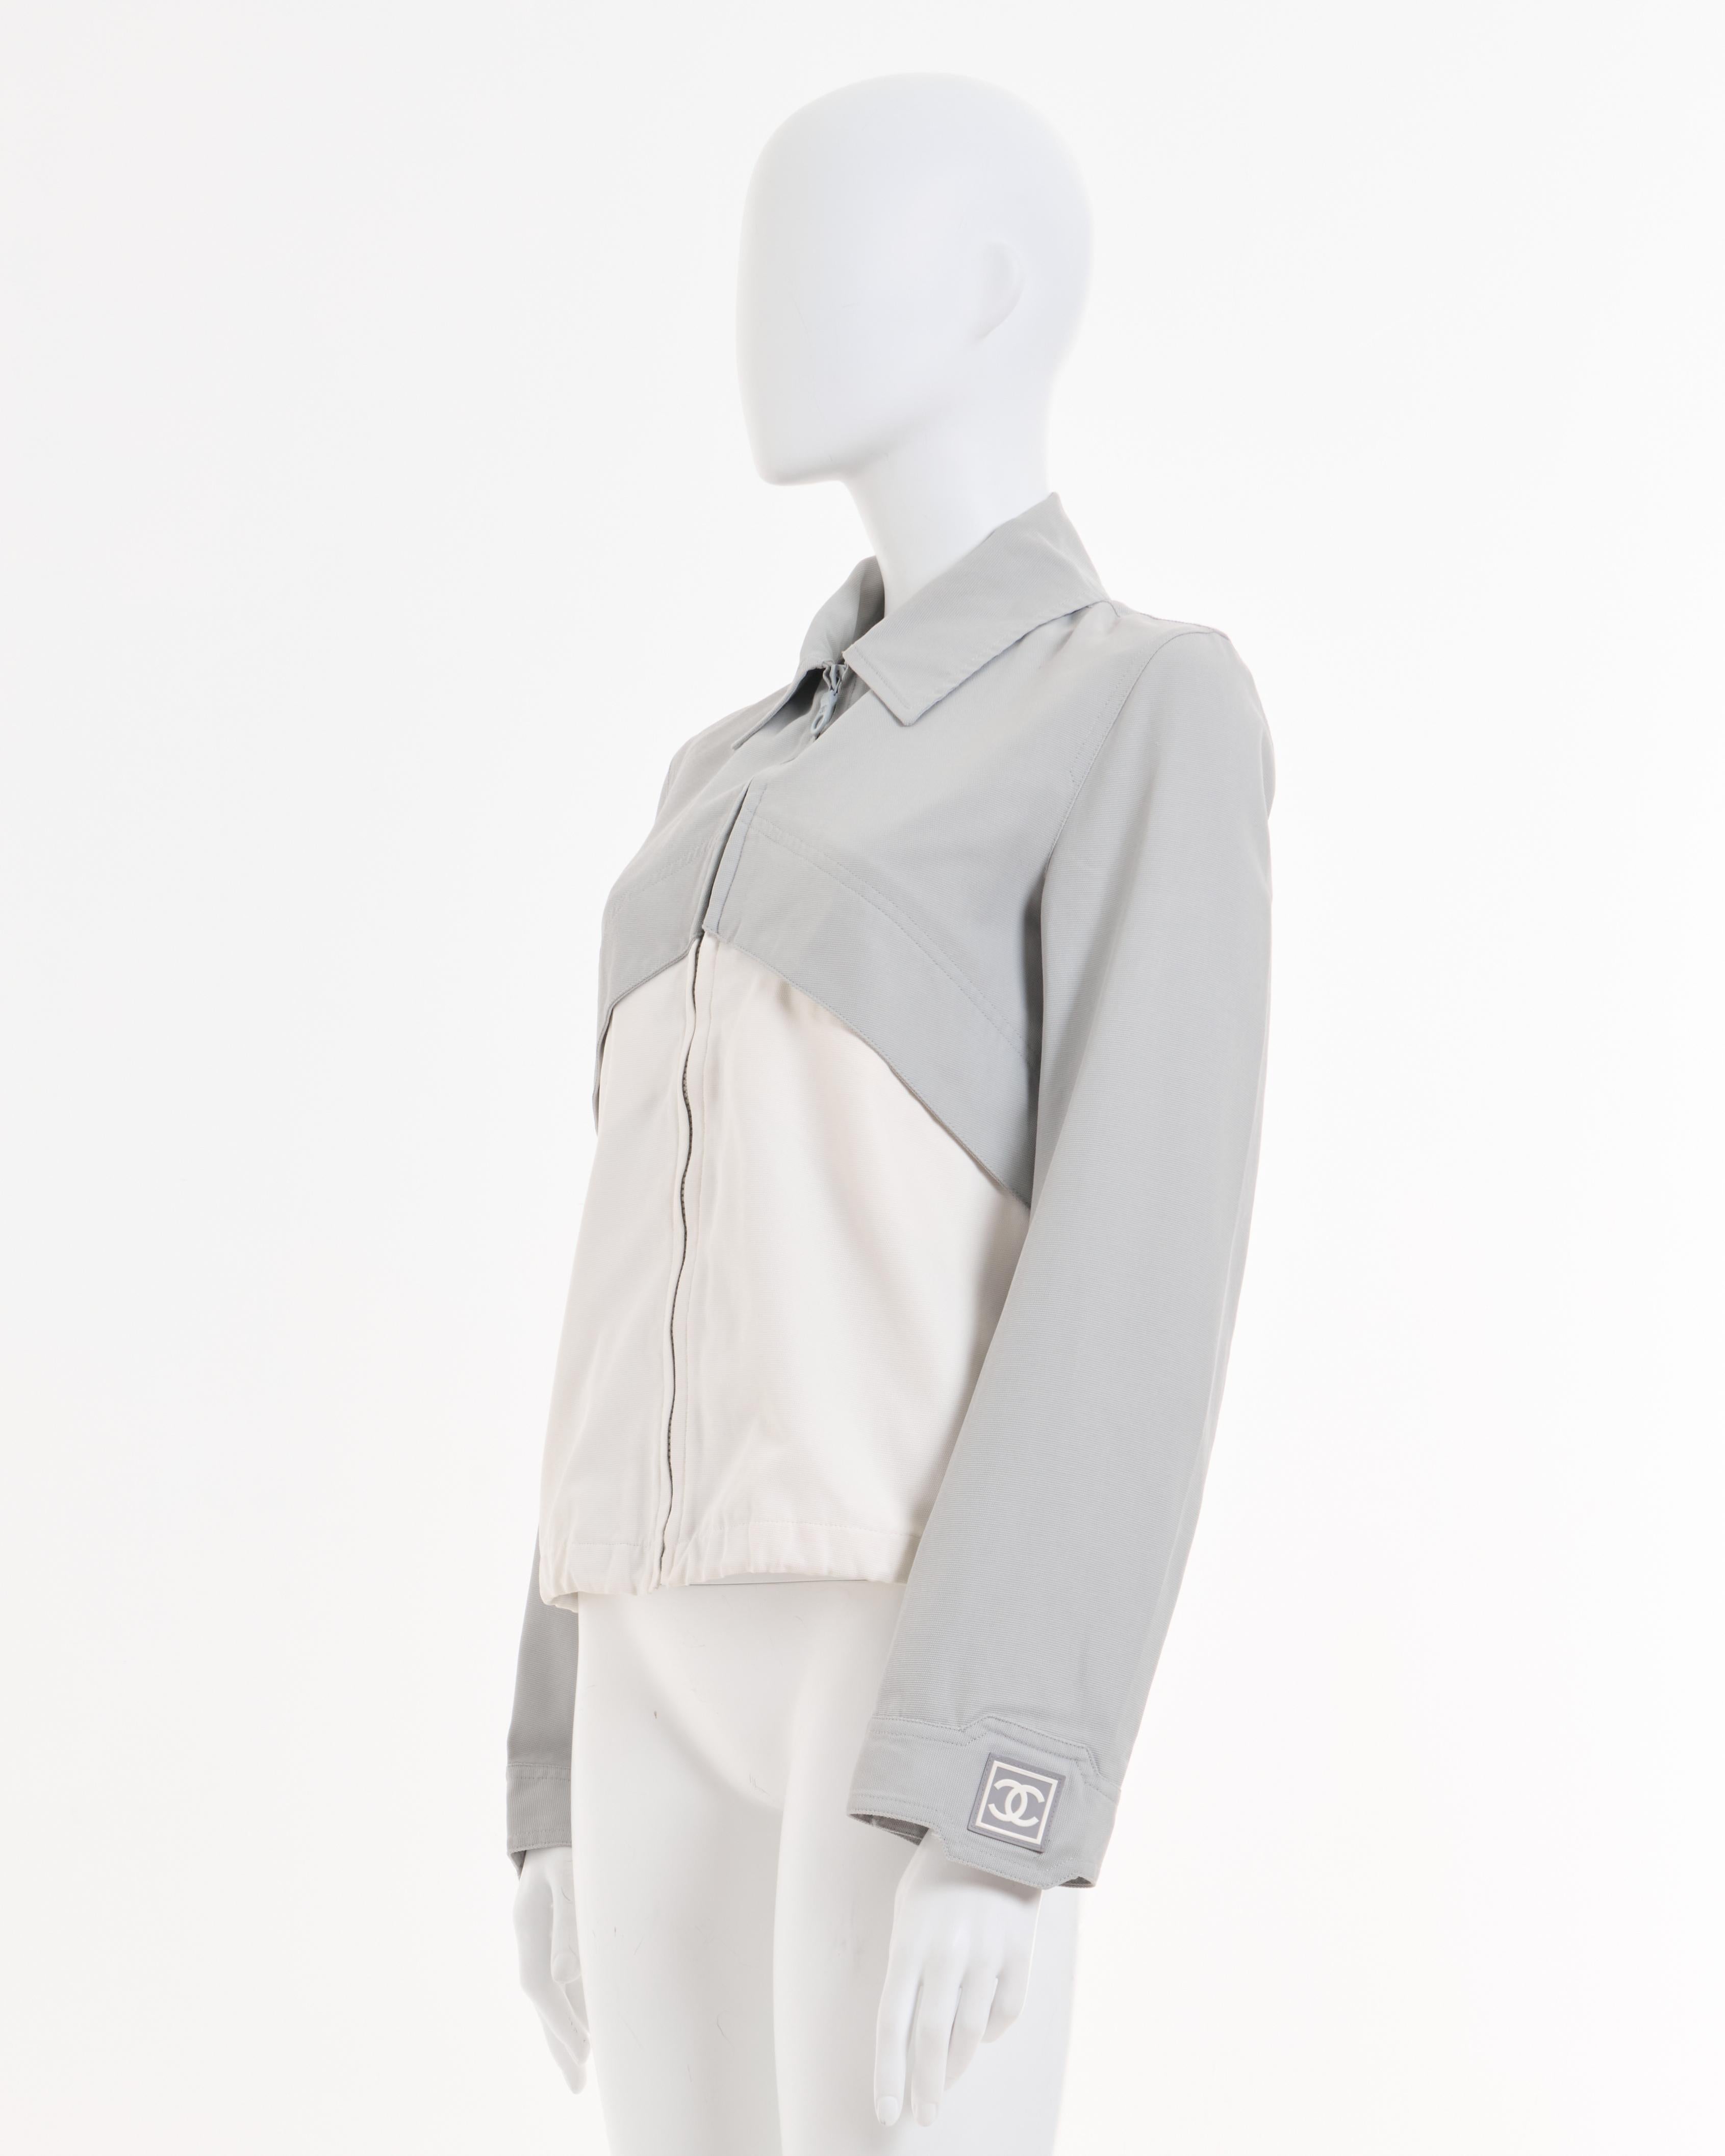 Chanel by Karl Lagerfeld F/W 2001 Dove gray and white zip-up sport jacket  In Good Condition For Sale In Milano, IT